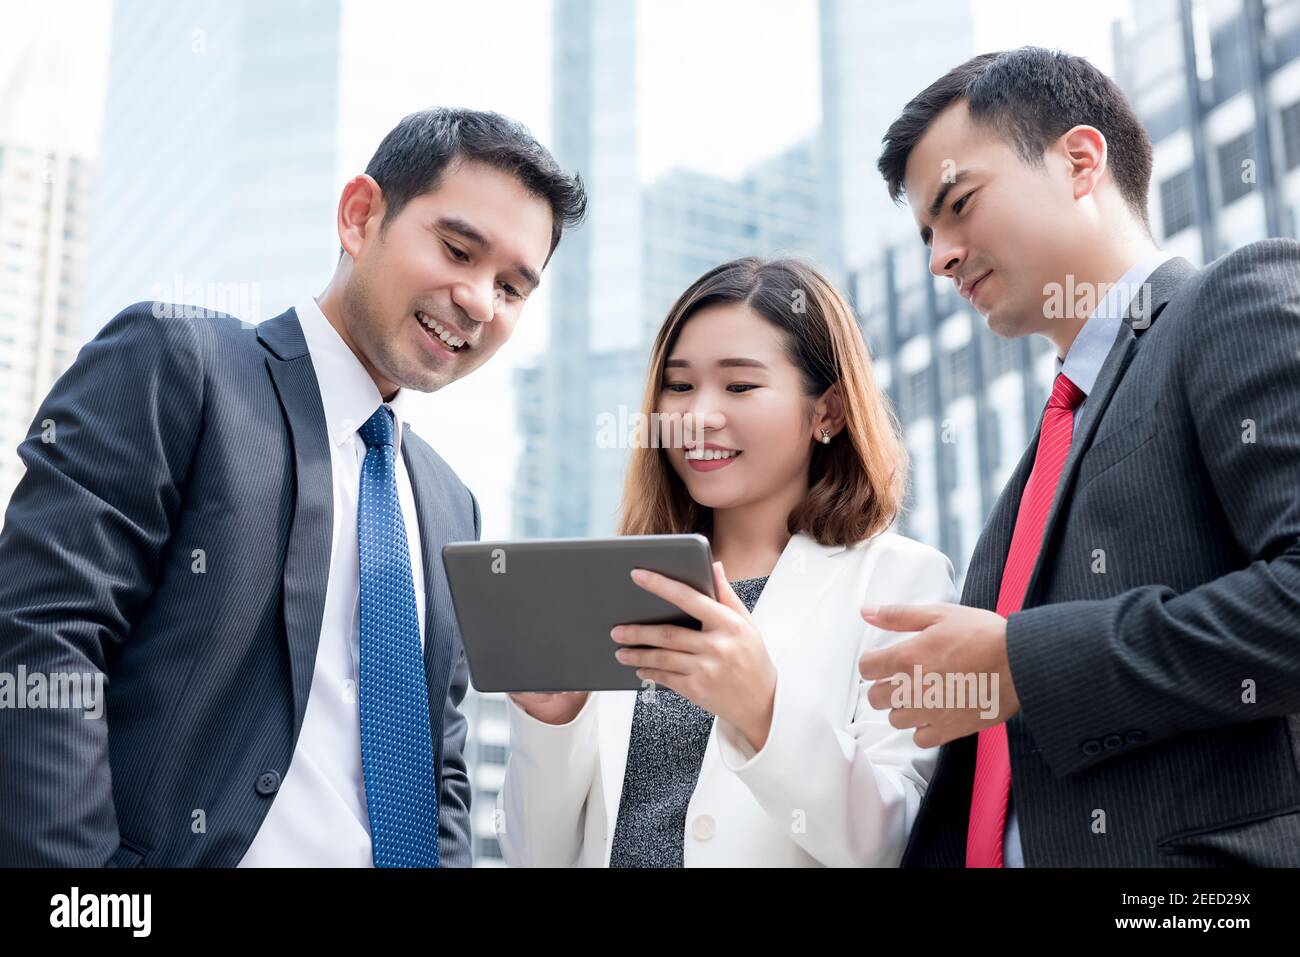 Group of multiethnic business team discussing work on tablet computer outdoors in the city Stock Photo